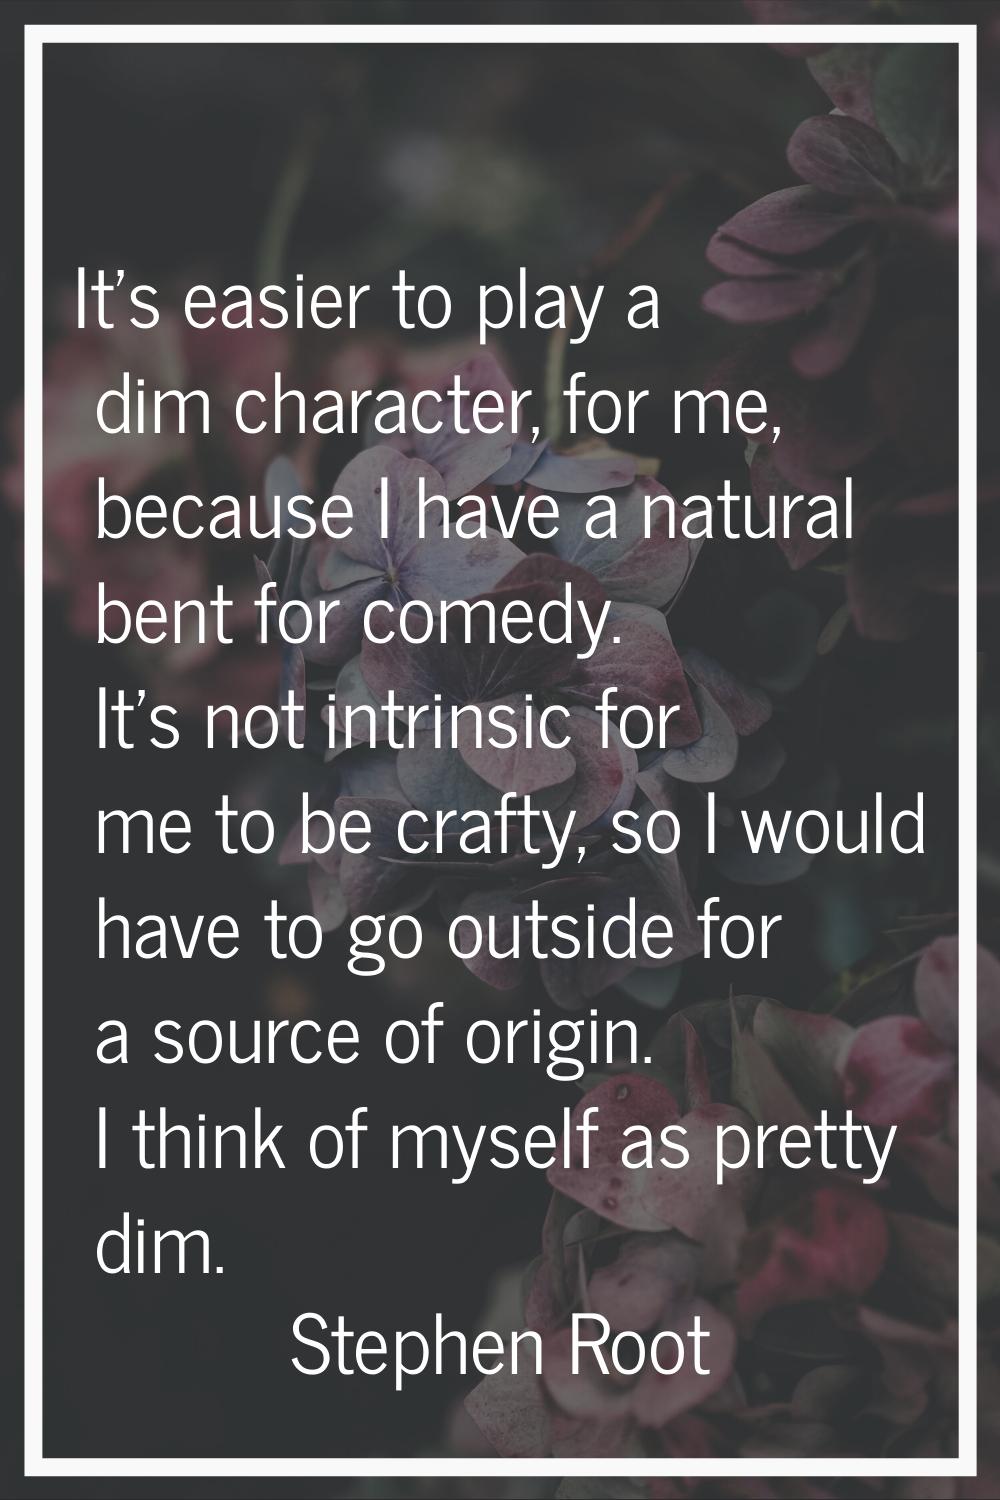 It's easier to play a dim character, for me, because I have a natural bent for comedy. It's not int